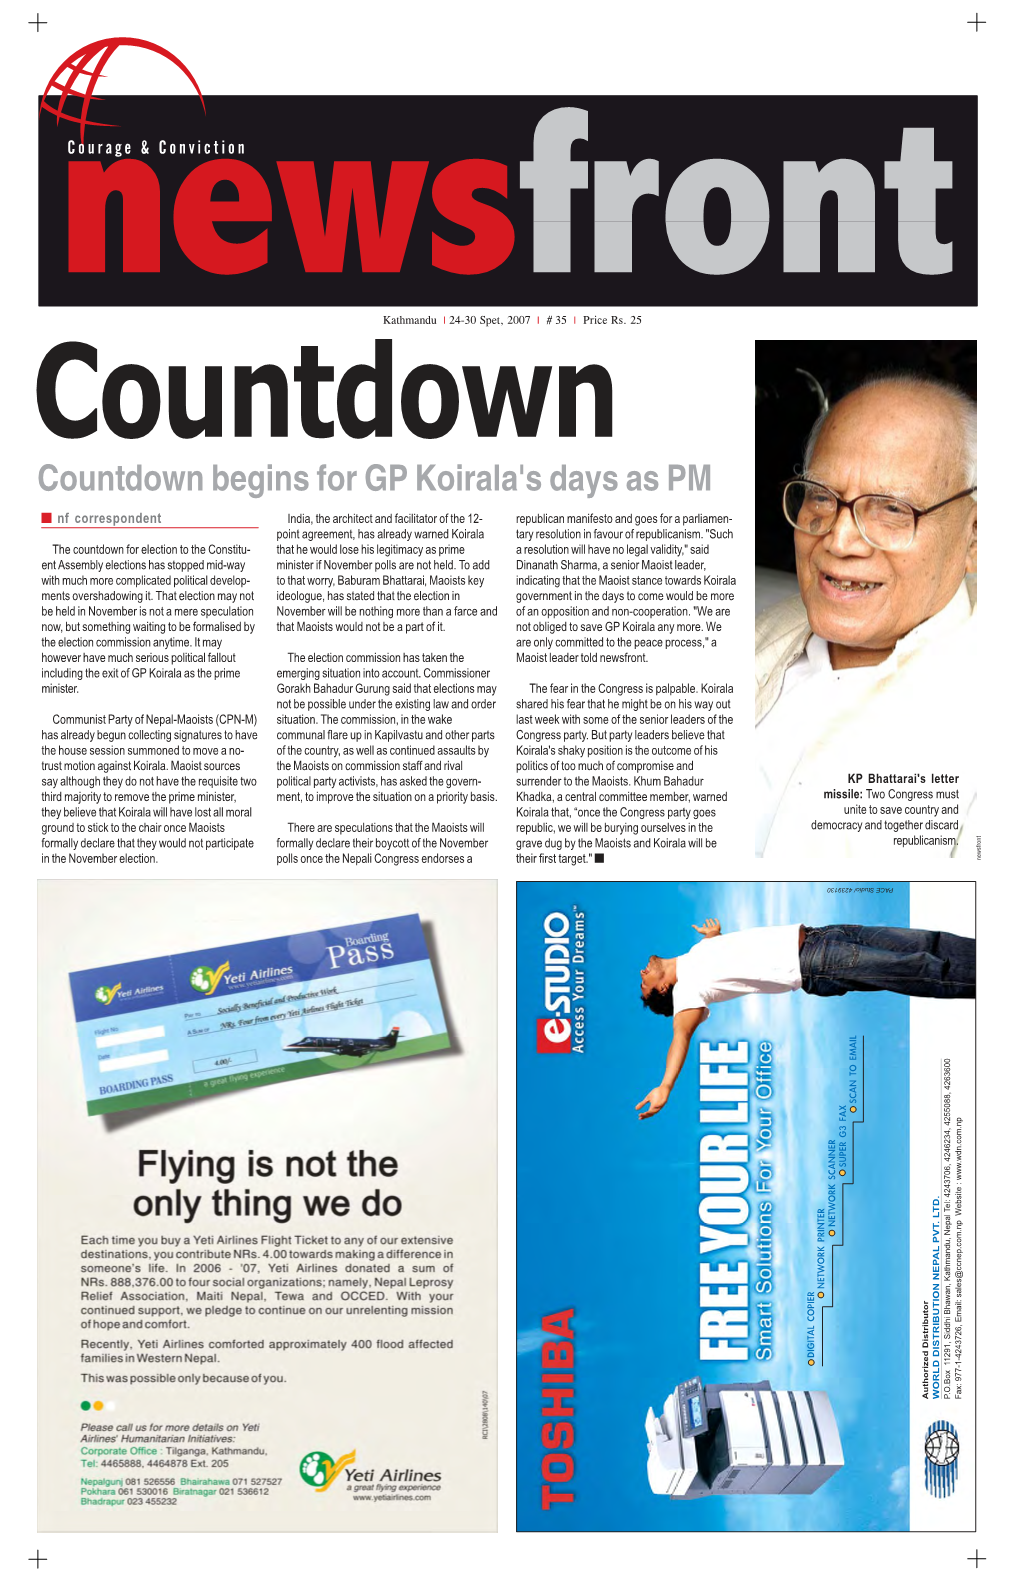 Countdown Begins for GP Koirala's Days As PM